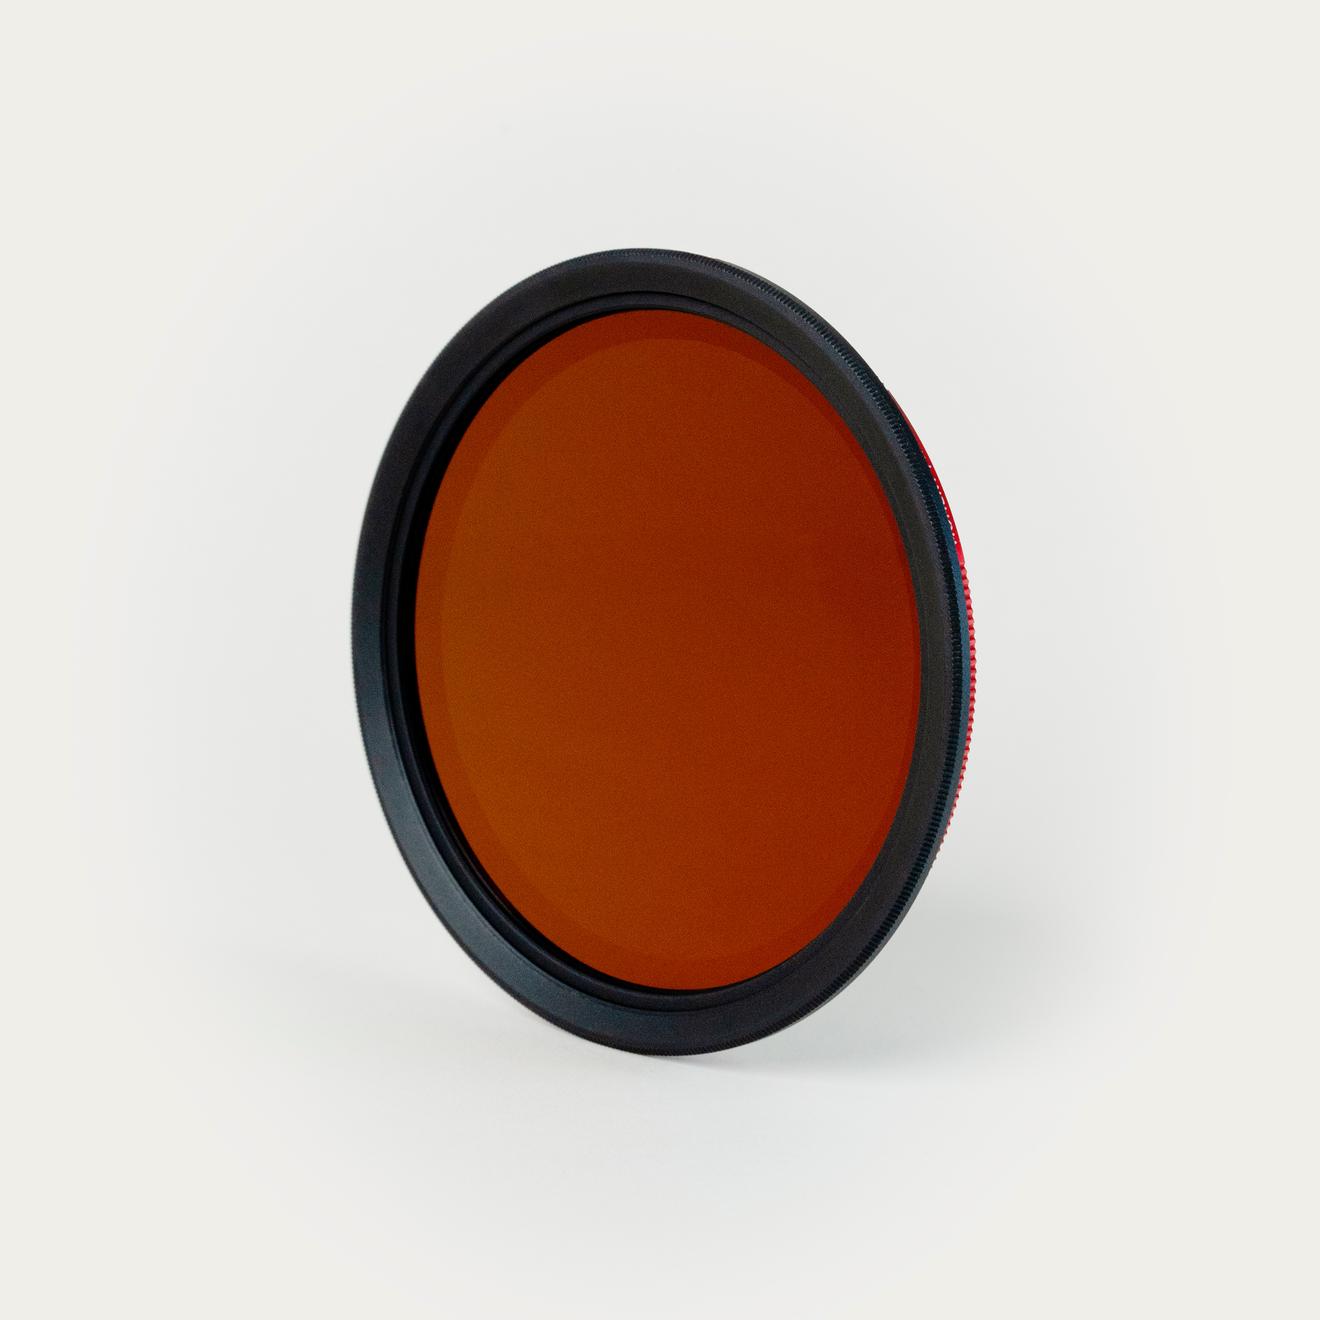 Variable ND Filter